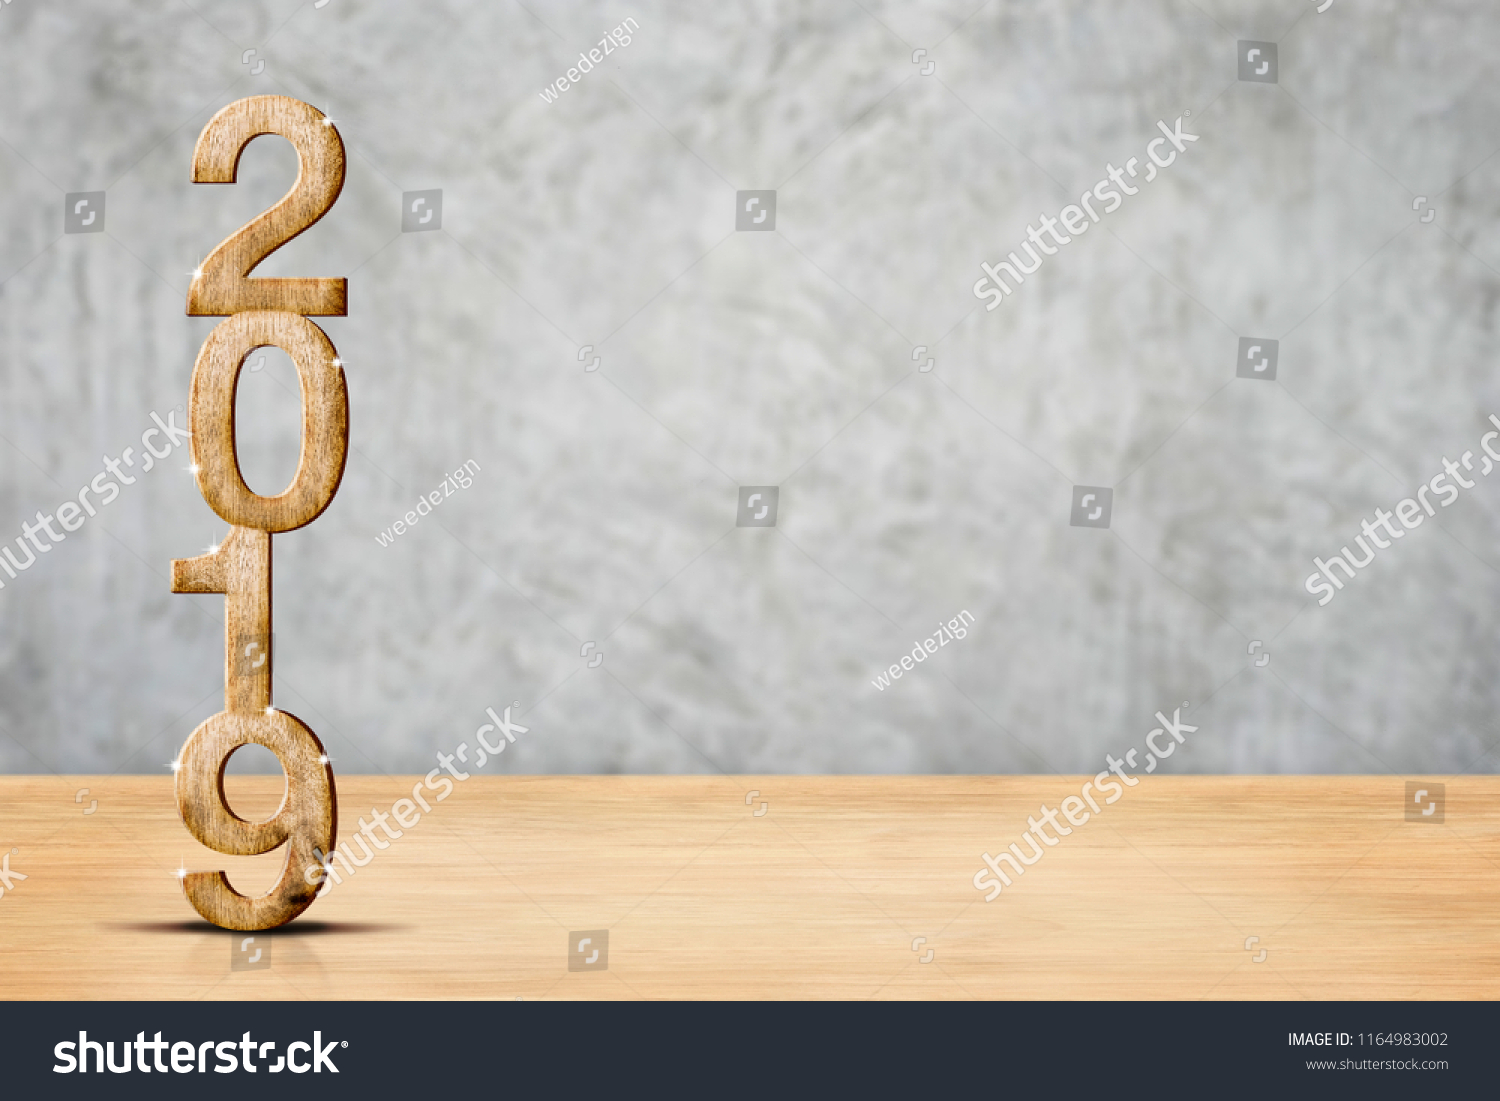 Happy new year 2019 wood (3d rendering) in perspective wood floor and concrete wall room,Holiday concept,Leave space for display of product for advertise promotion.Holiday mock up banner #1164983002